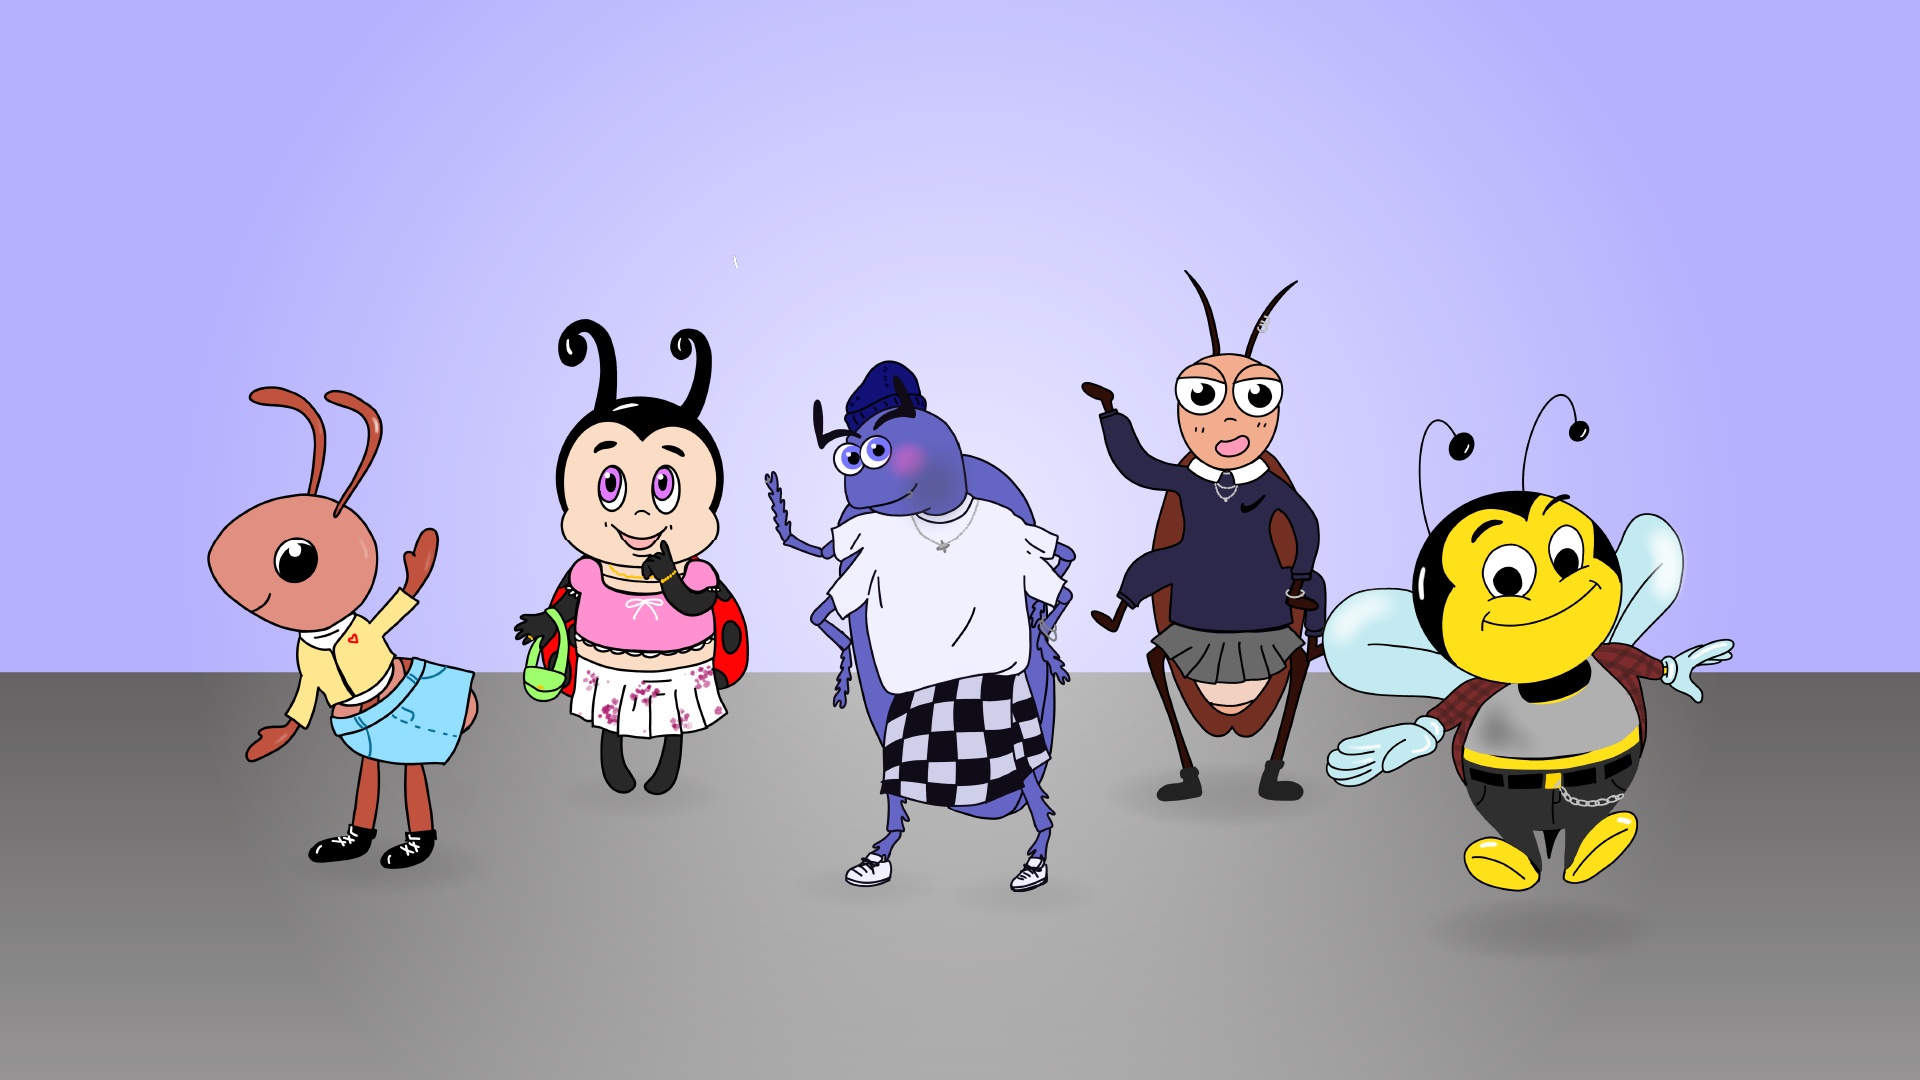 Assorted illustrations of bugs: ants, bees, cockroaches, beatles, and ladybugs in little outfits.